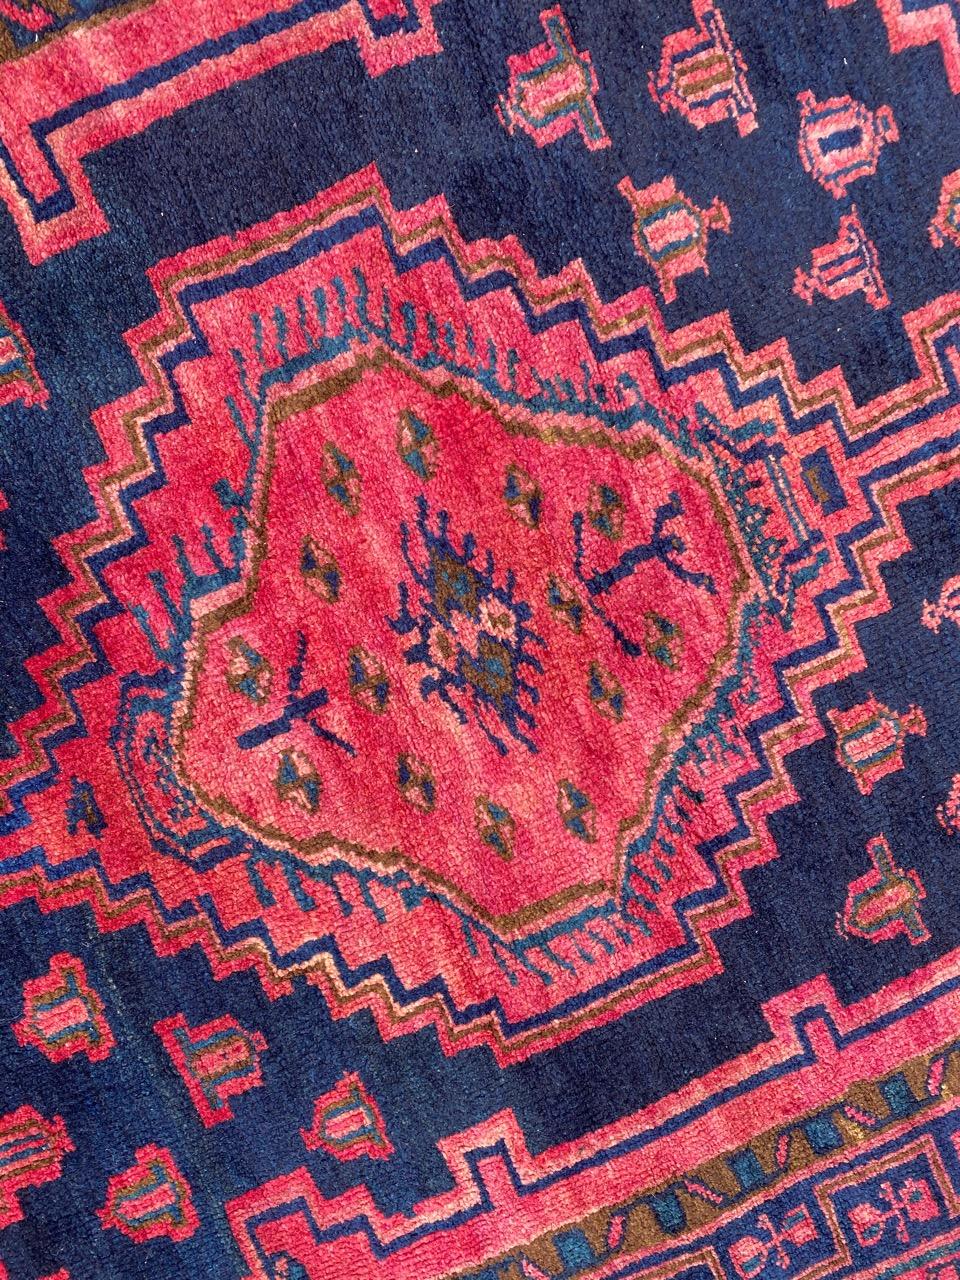 Nice midcentury rug with a tribal design and red and blue colors, entirely hand knotted with wool velvet on cotton foundation.

✨✨✨
